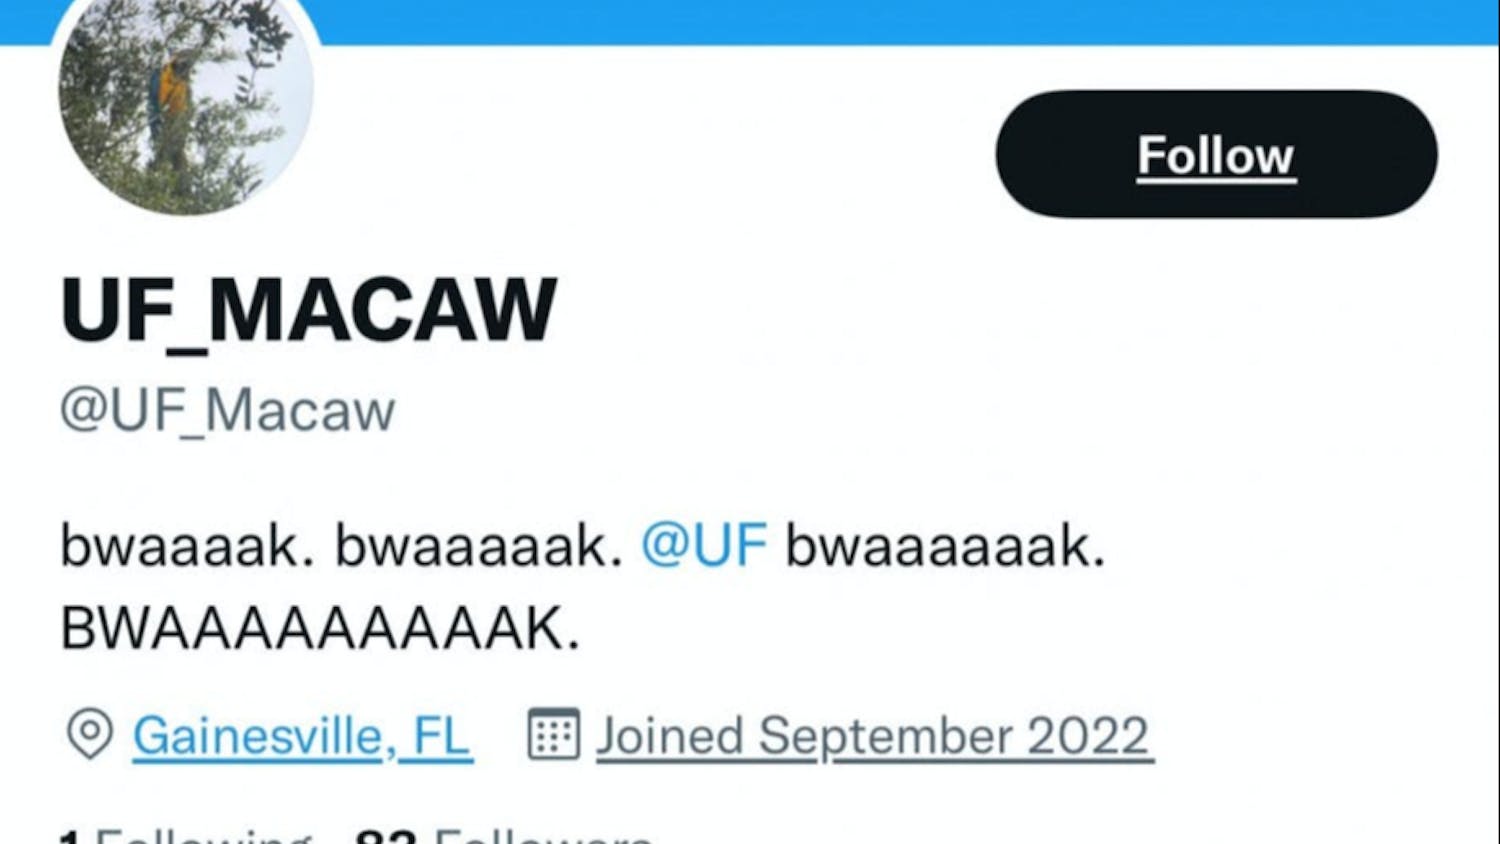 After UF scientists encountered the macaw, a Twitter account popped up ﻿with the username @UF_Macaw.